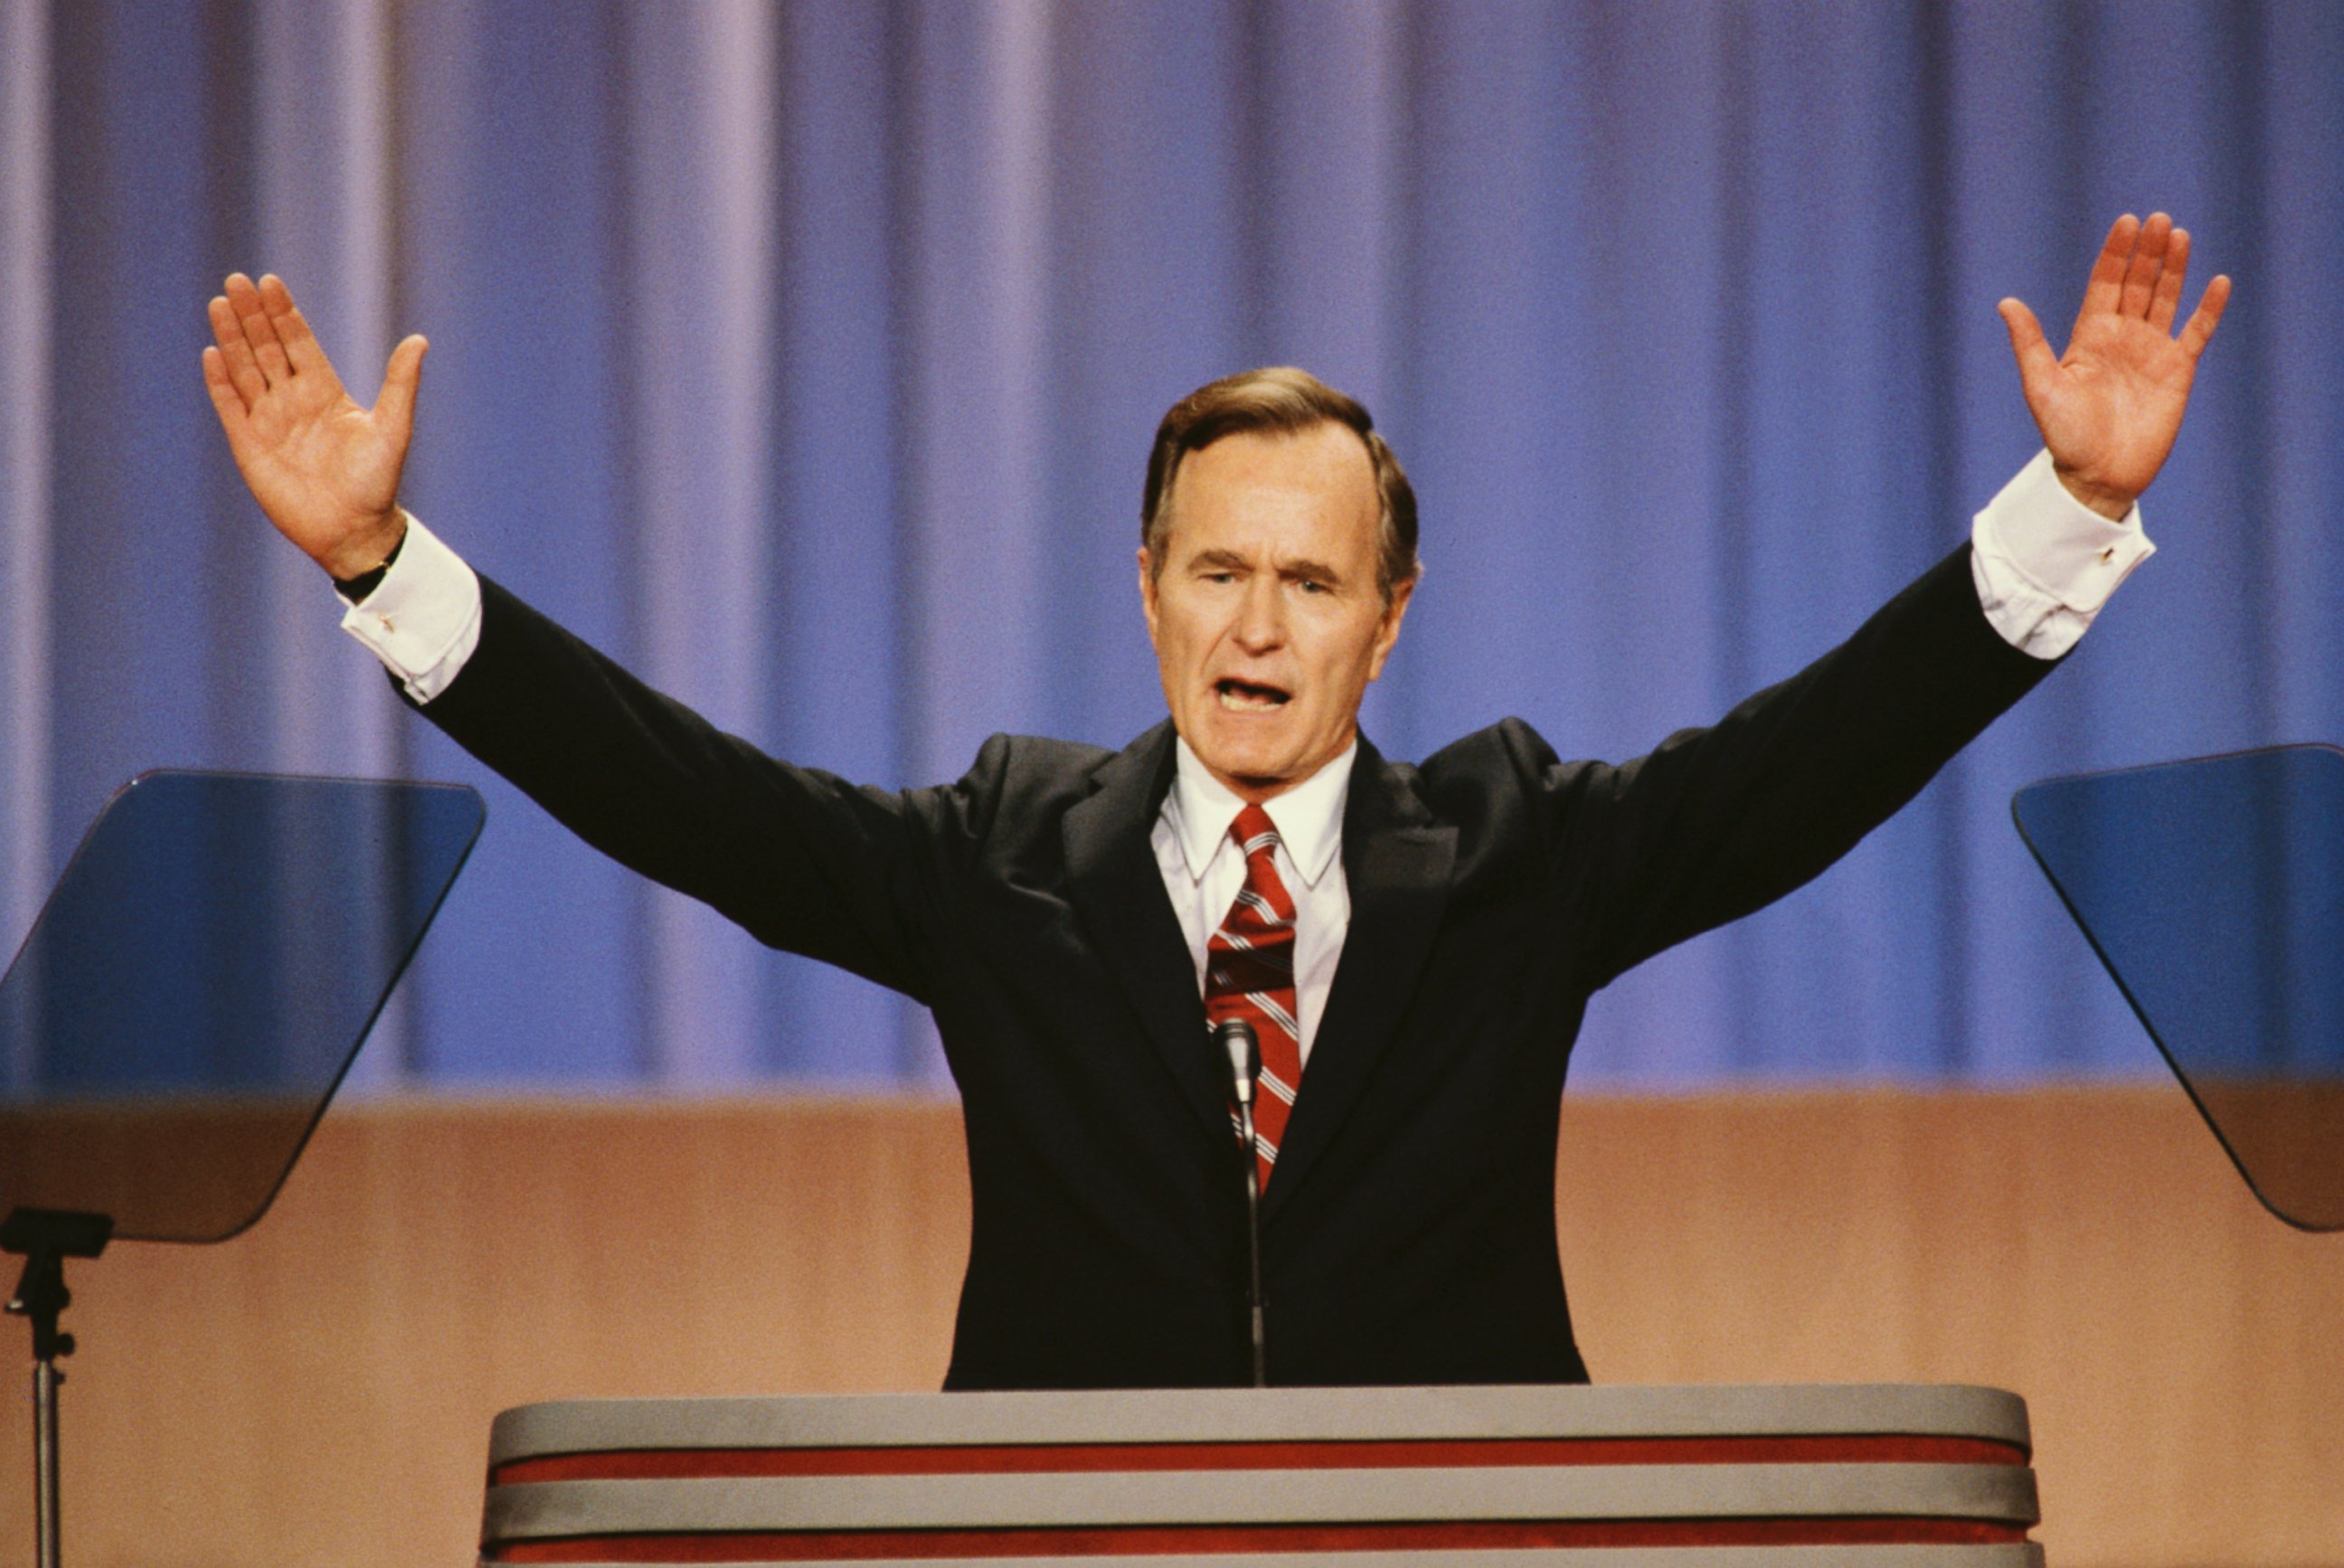 PHOTO: Vice President George Bush raises his arms during a speech at the 1988 Republican National Convention in New Orleans.